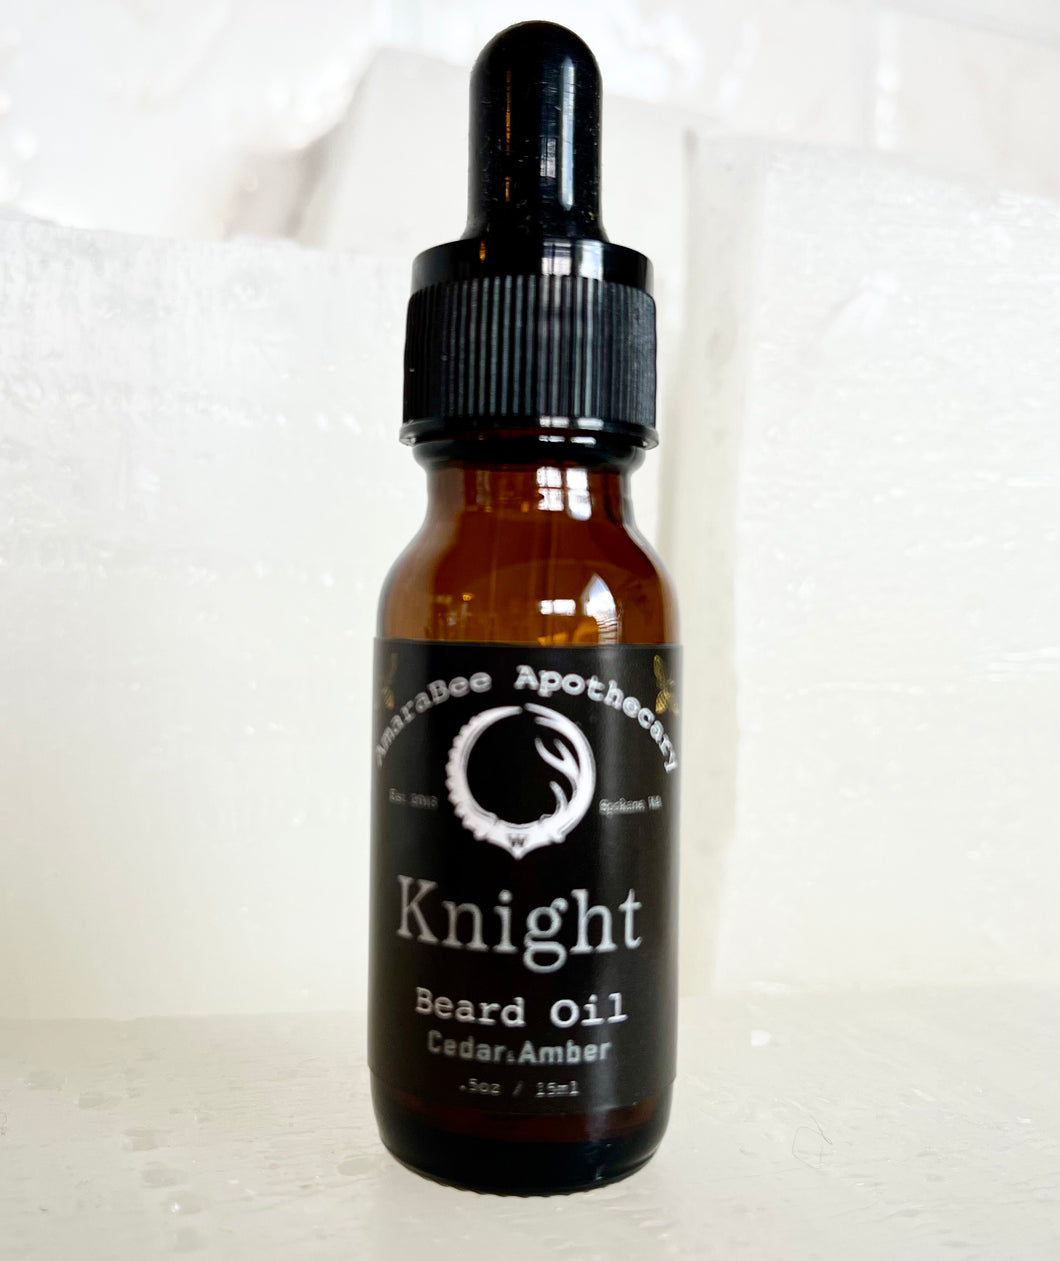 Knight Beard Oil | Warlock by AmaraBee Apothecary | Men’s Hair Care | Natural